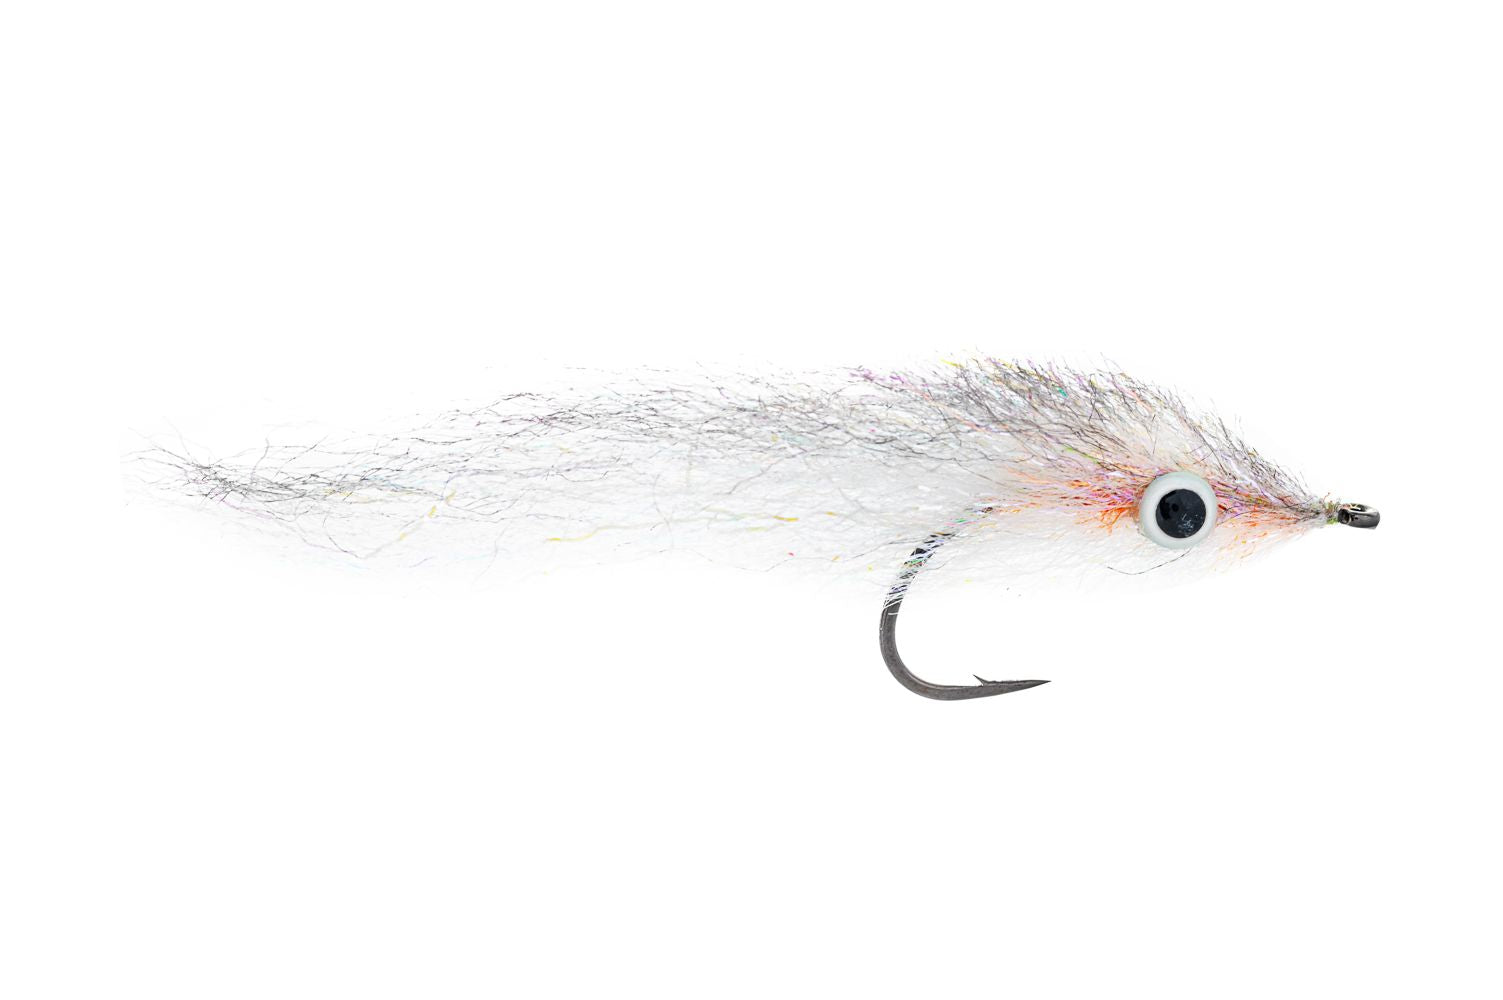 Enrico Puglisi EP Ghost Minnow (3-Pack)